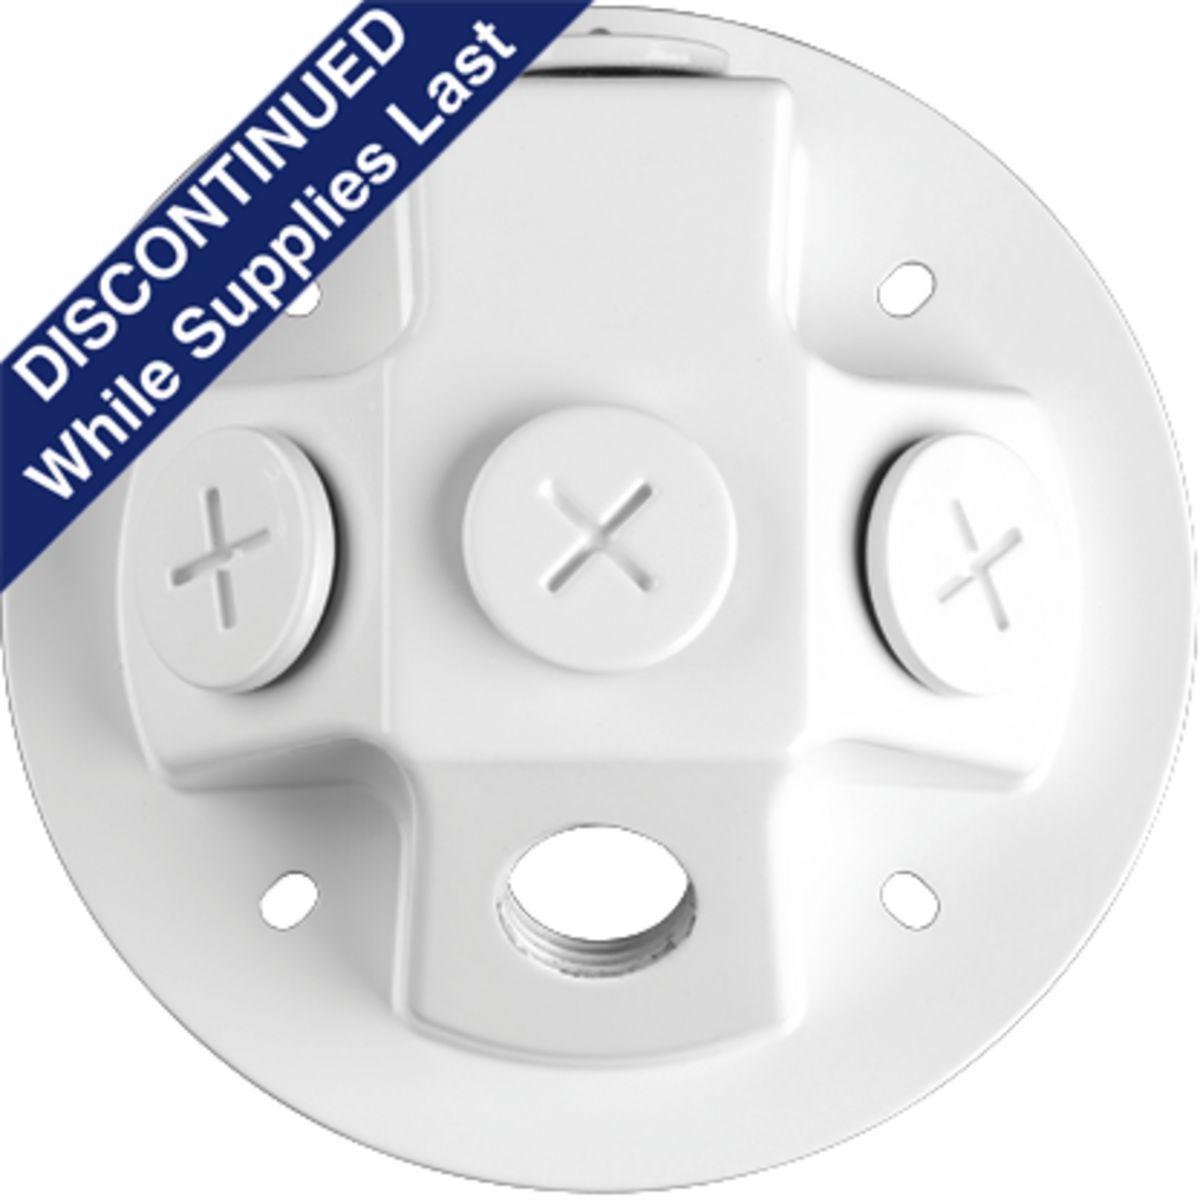 Hubbell P6343-28 Backplate for the LED flood lights with die-cast construction. This back plate can be used with a single head or multiple heads and motion sensors. Heads are sold separately (P6342). White finish.  ; Backplate for the LED Security flood lights. ; Back pla